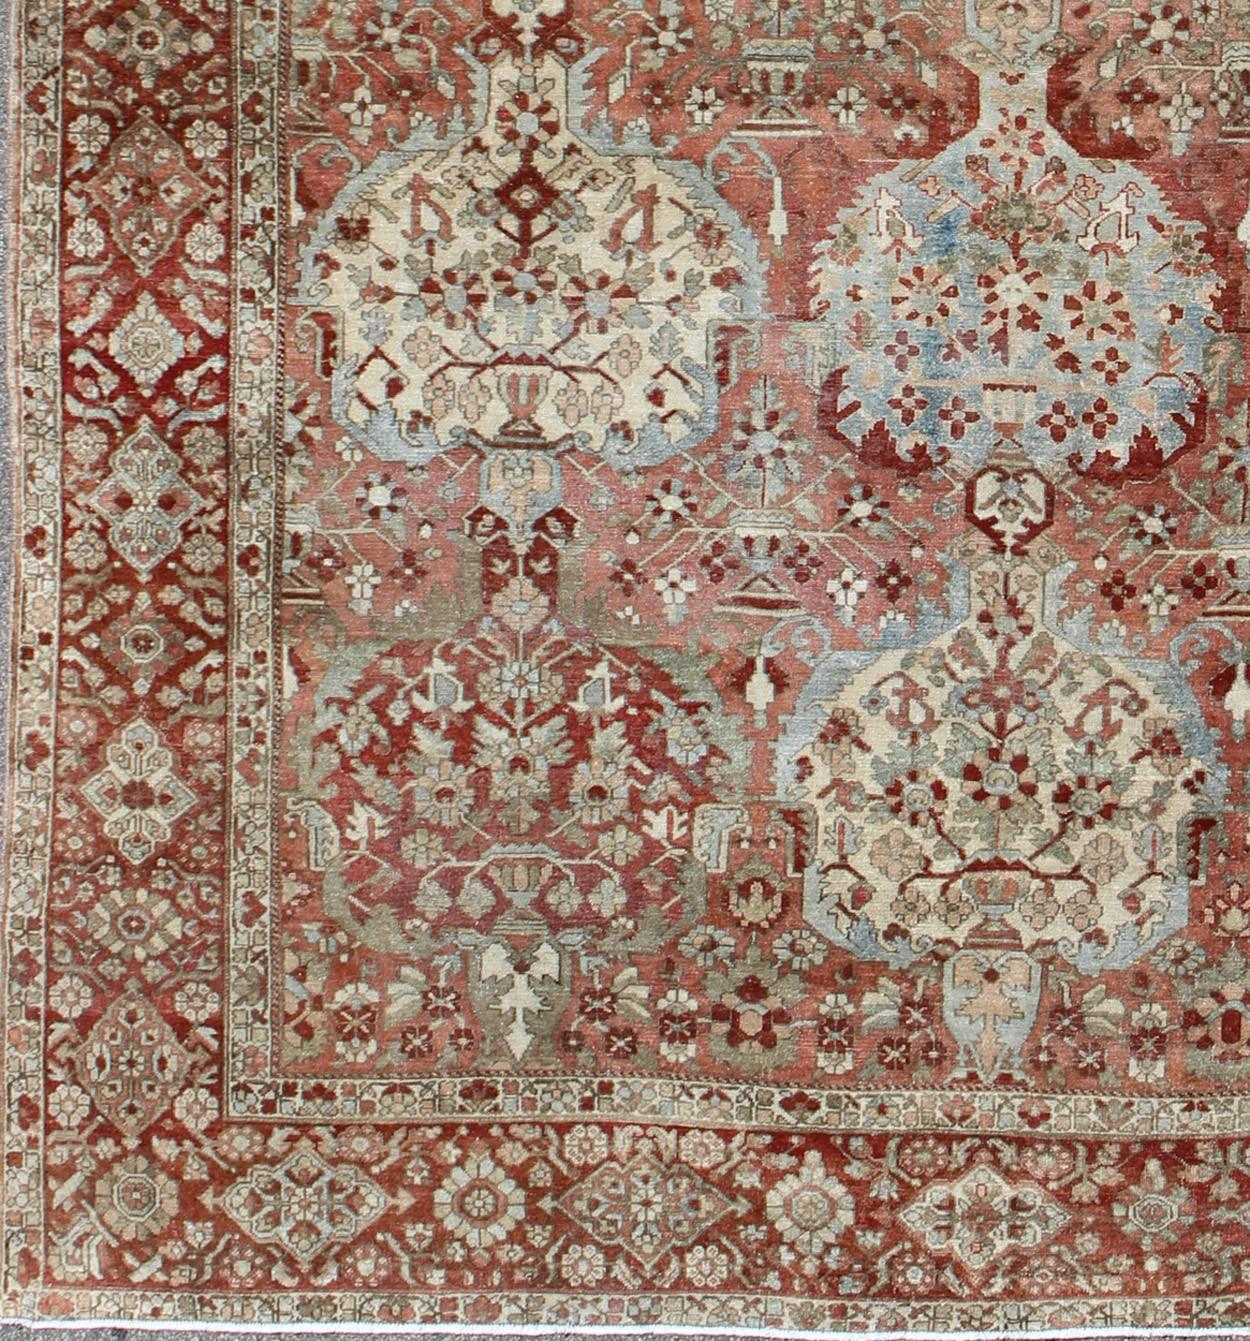 Antique Persian Bakhtiari rug with tiered sub-geometric medallions and motifs. Keivan Woven Arts /  rug 17-0101, country of origin / type: Iran / Bakhtiari, circa 1920

This stunning antique Persian Bakhtiari carpet features an incredible tiered